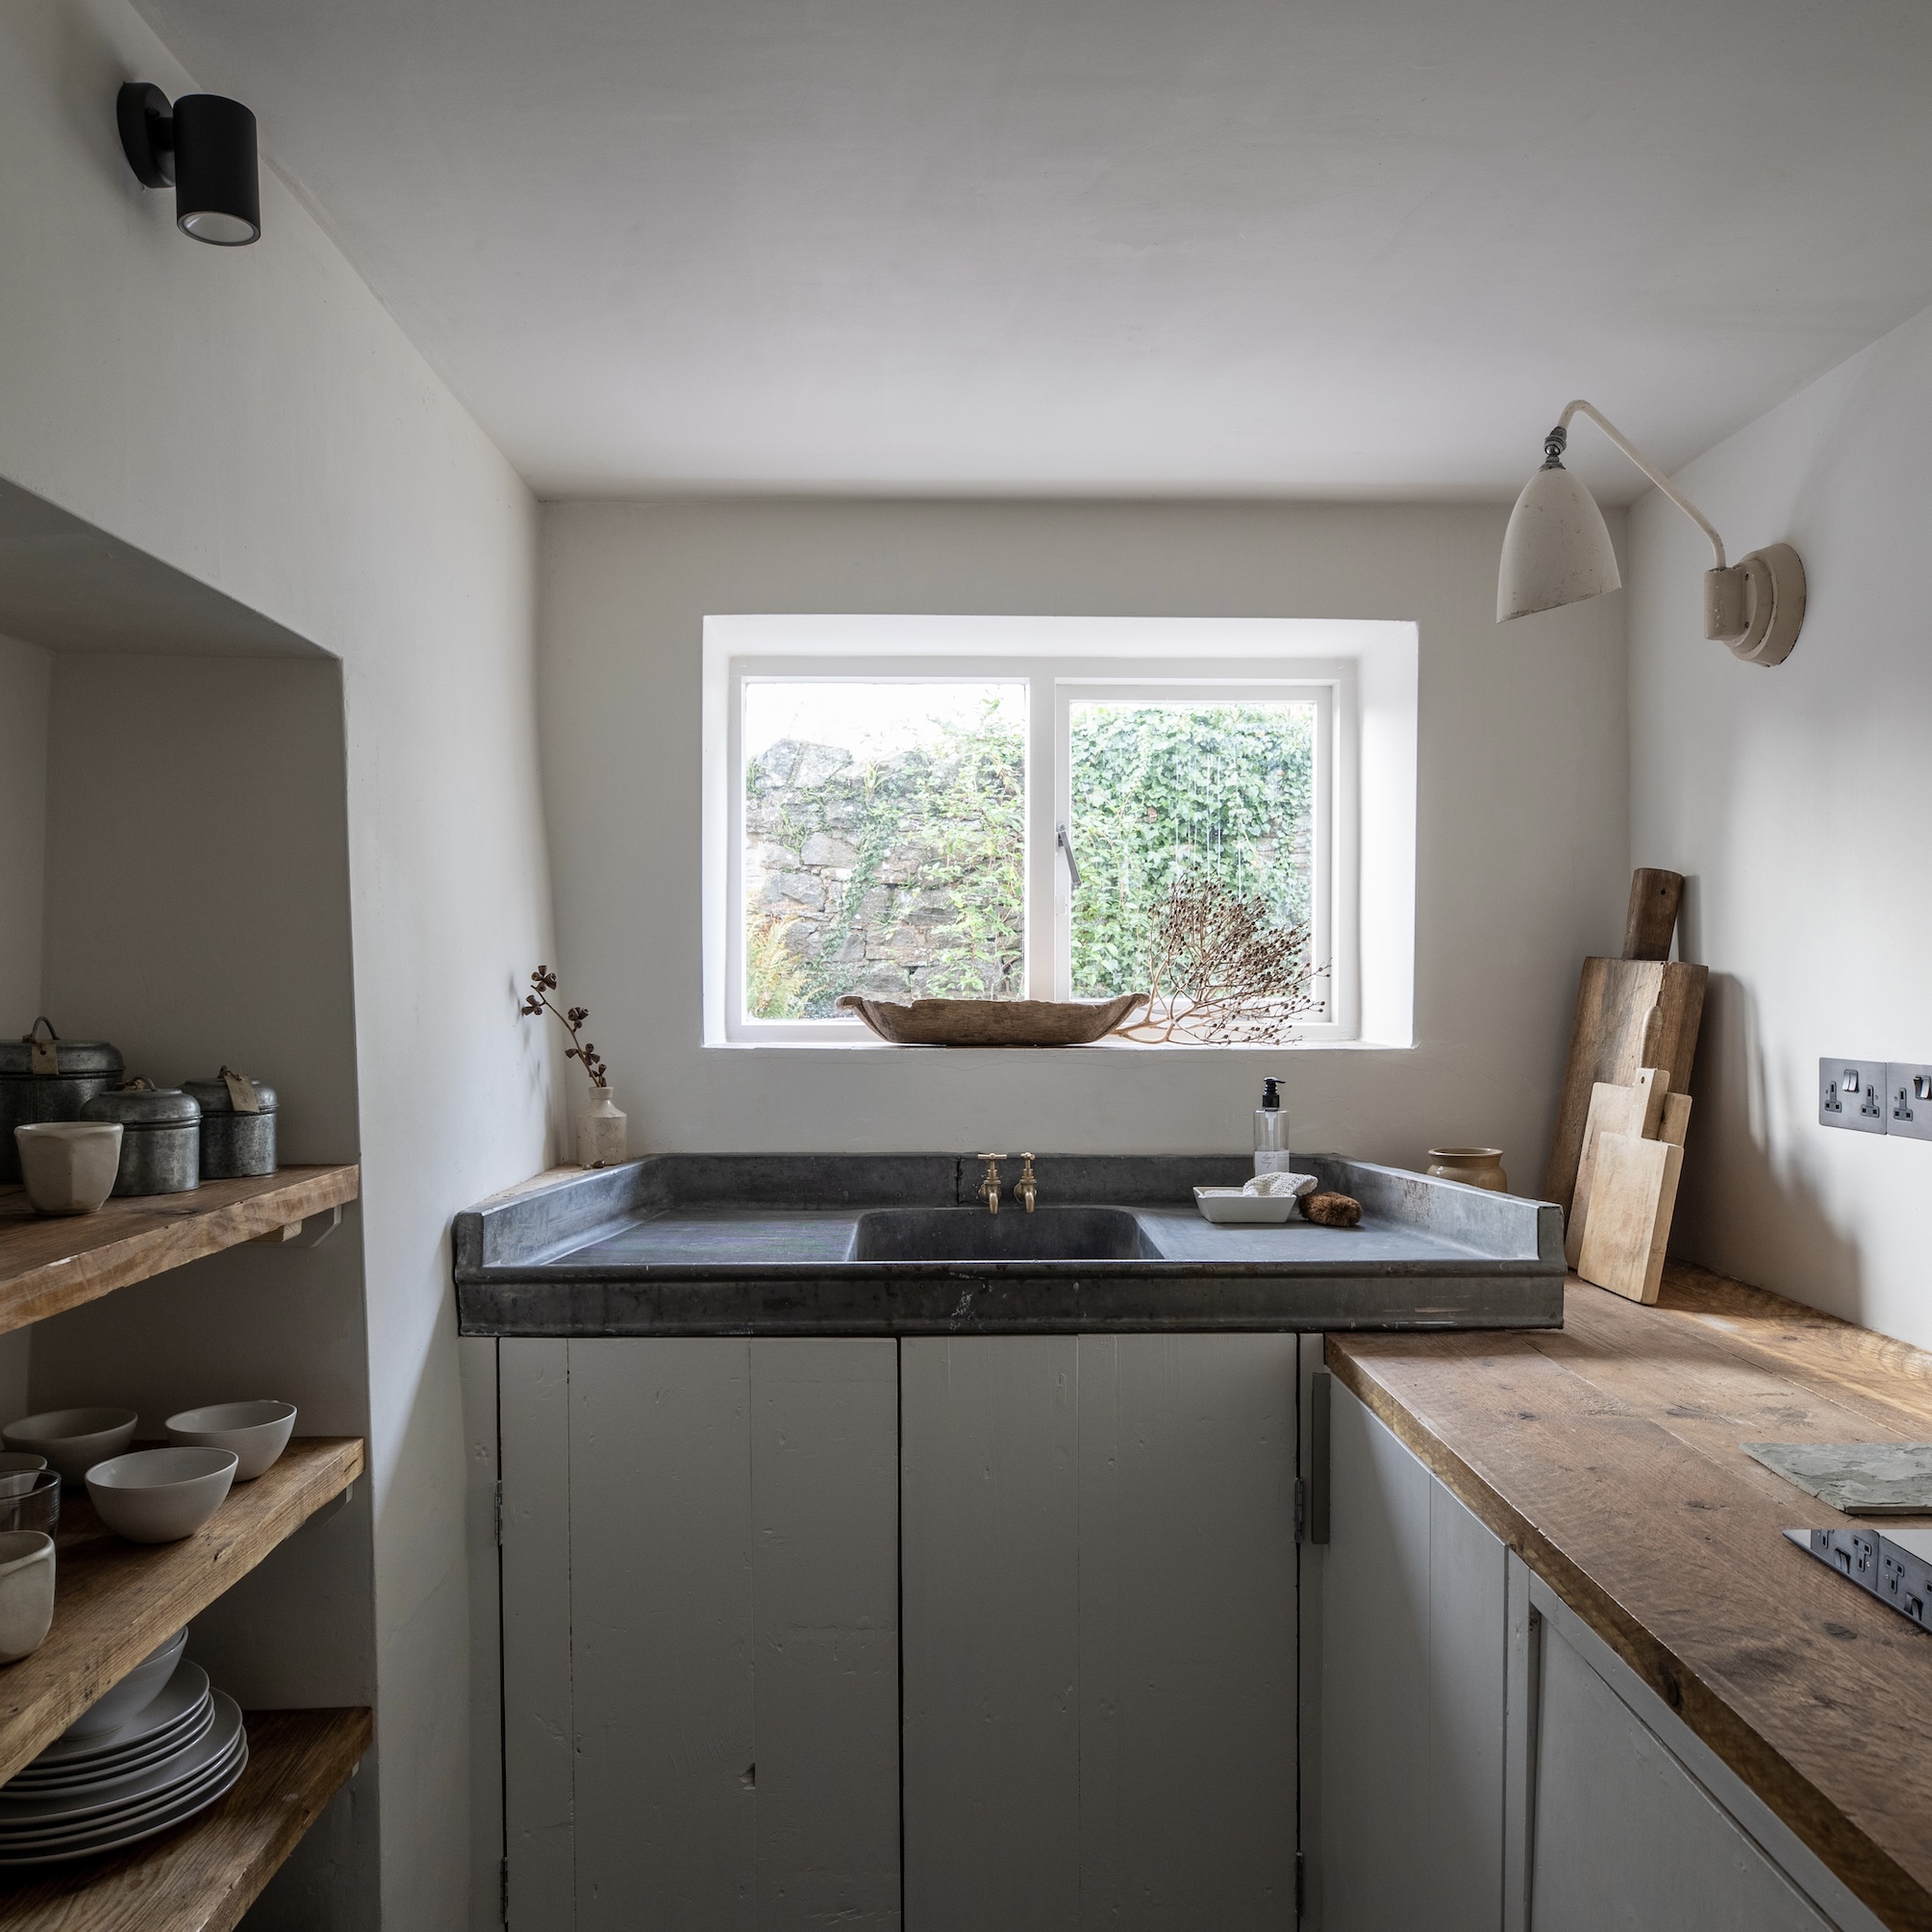 Kitchen of the Week: A Tiny Reclaimed Kitchen, Designed in a Wink